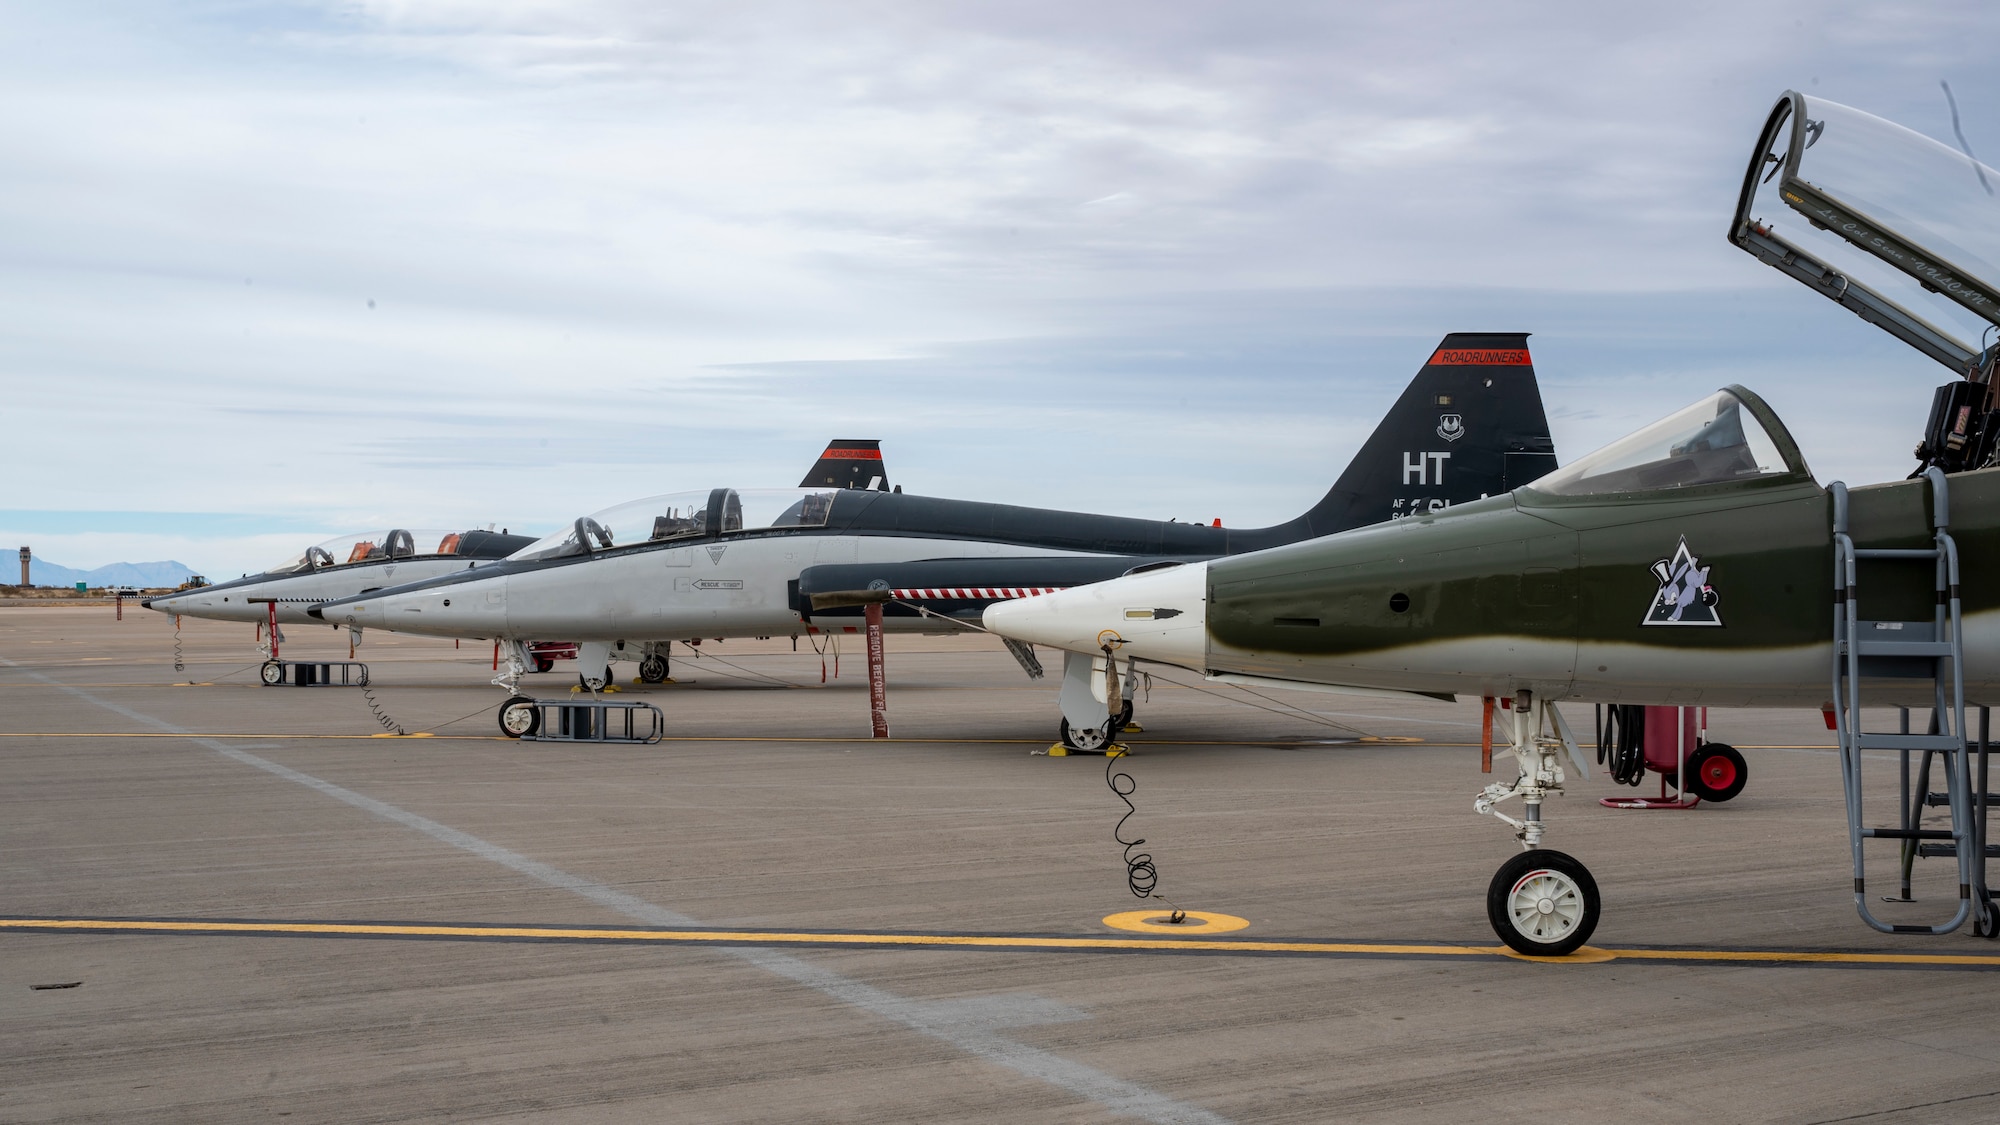 Three T-38C Talons assigned to the 586th Flight Test Squadron are parked on the runway at Holloman Air Force Base, New Mexico, Jan. 10, 2022.